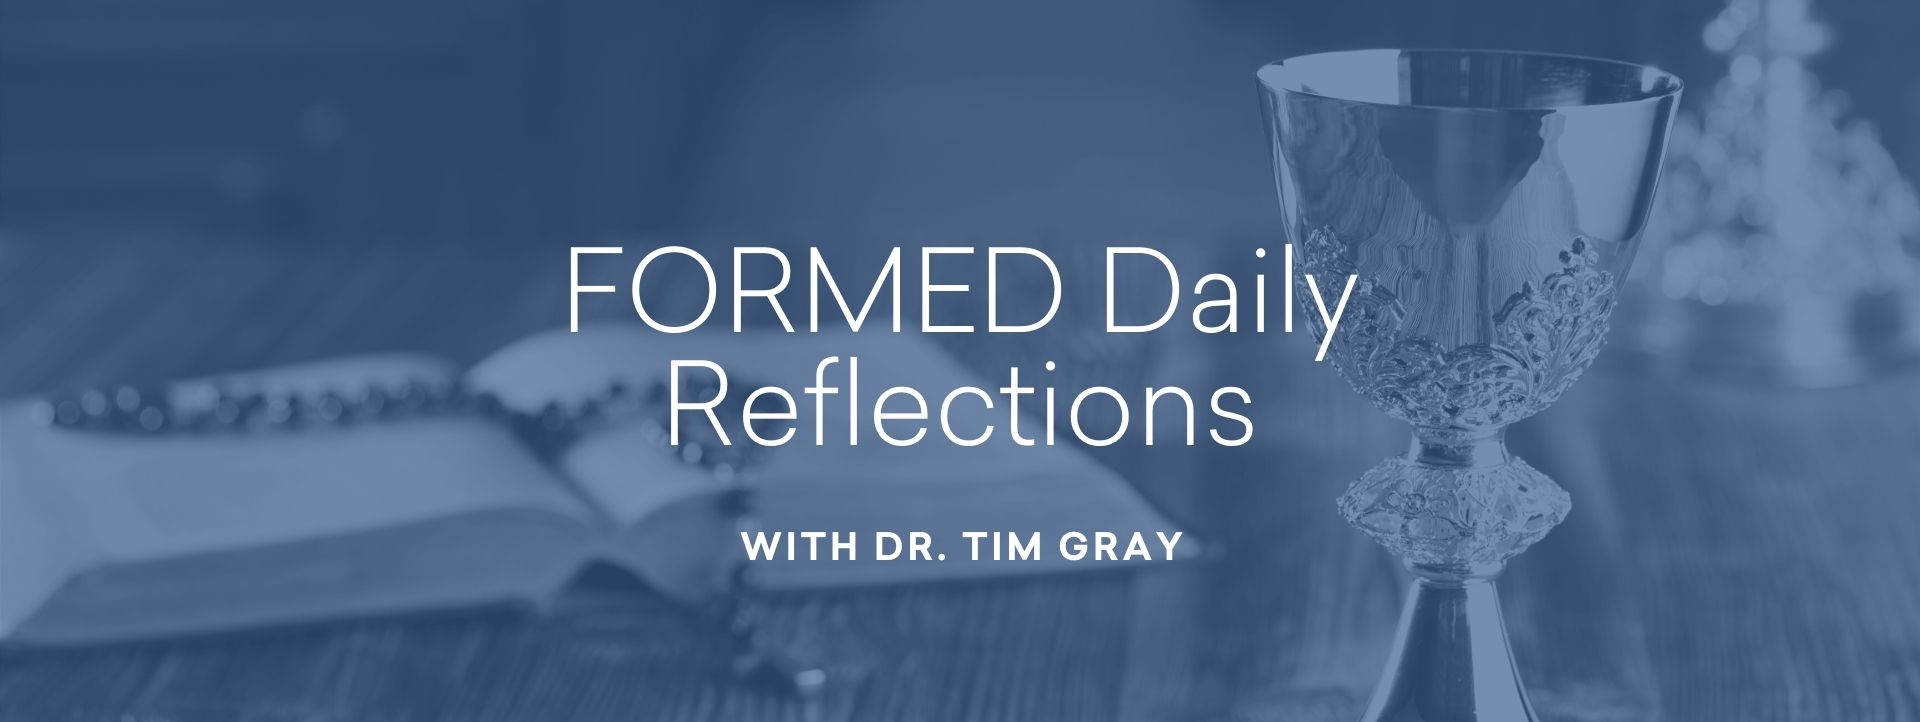 aa daily reflections july 14